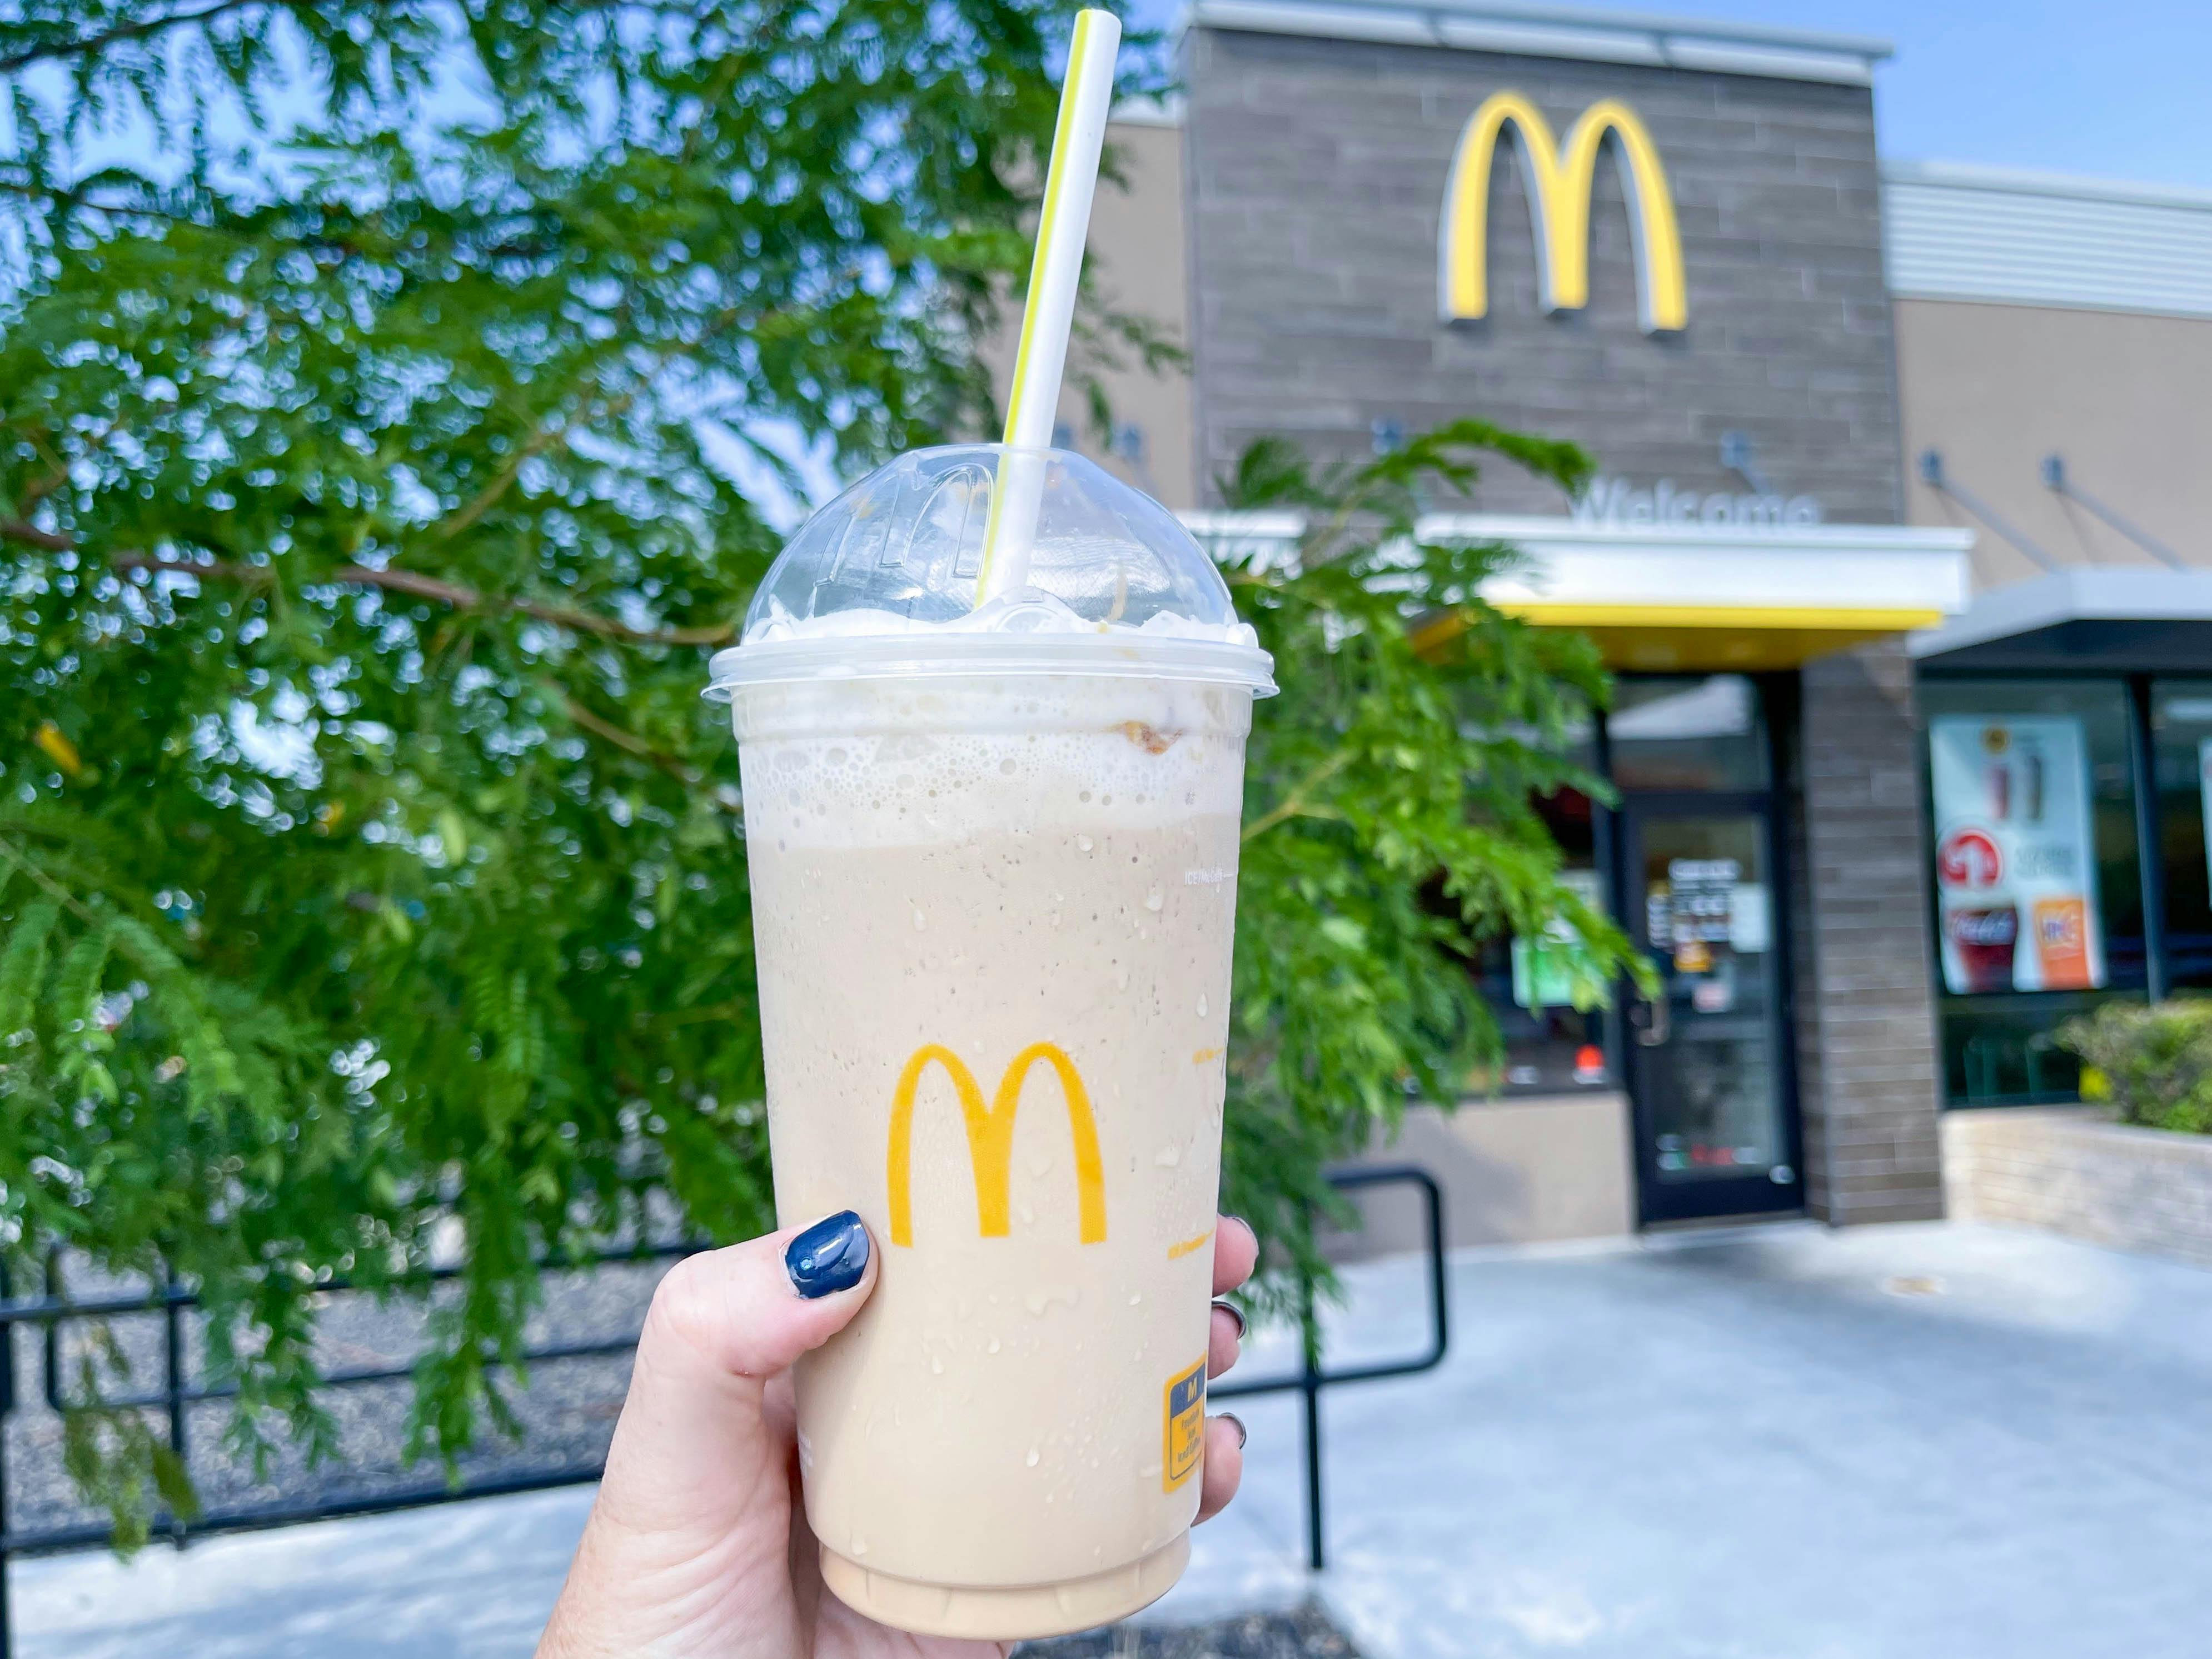 A person's hand holding up a large McDonald's frappe outside of a McDonald's.